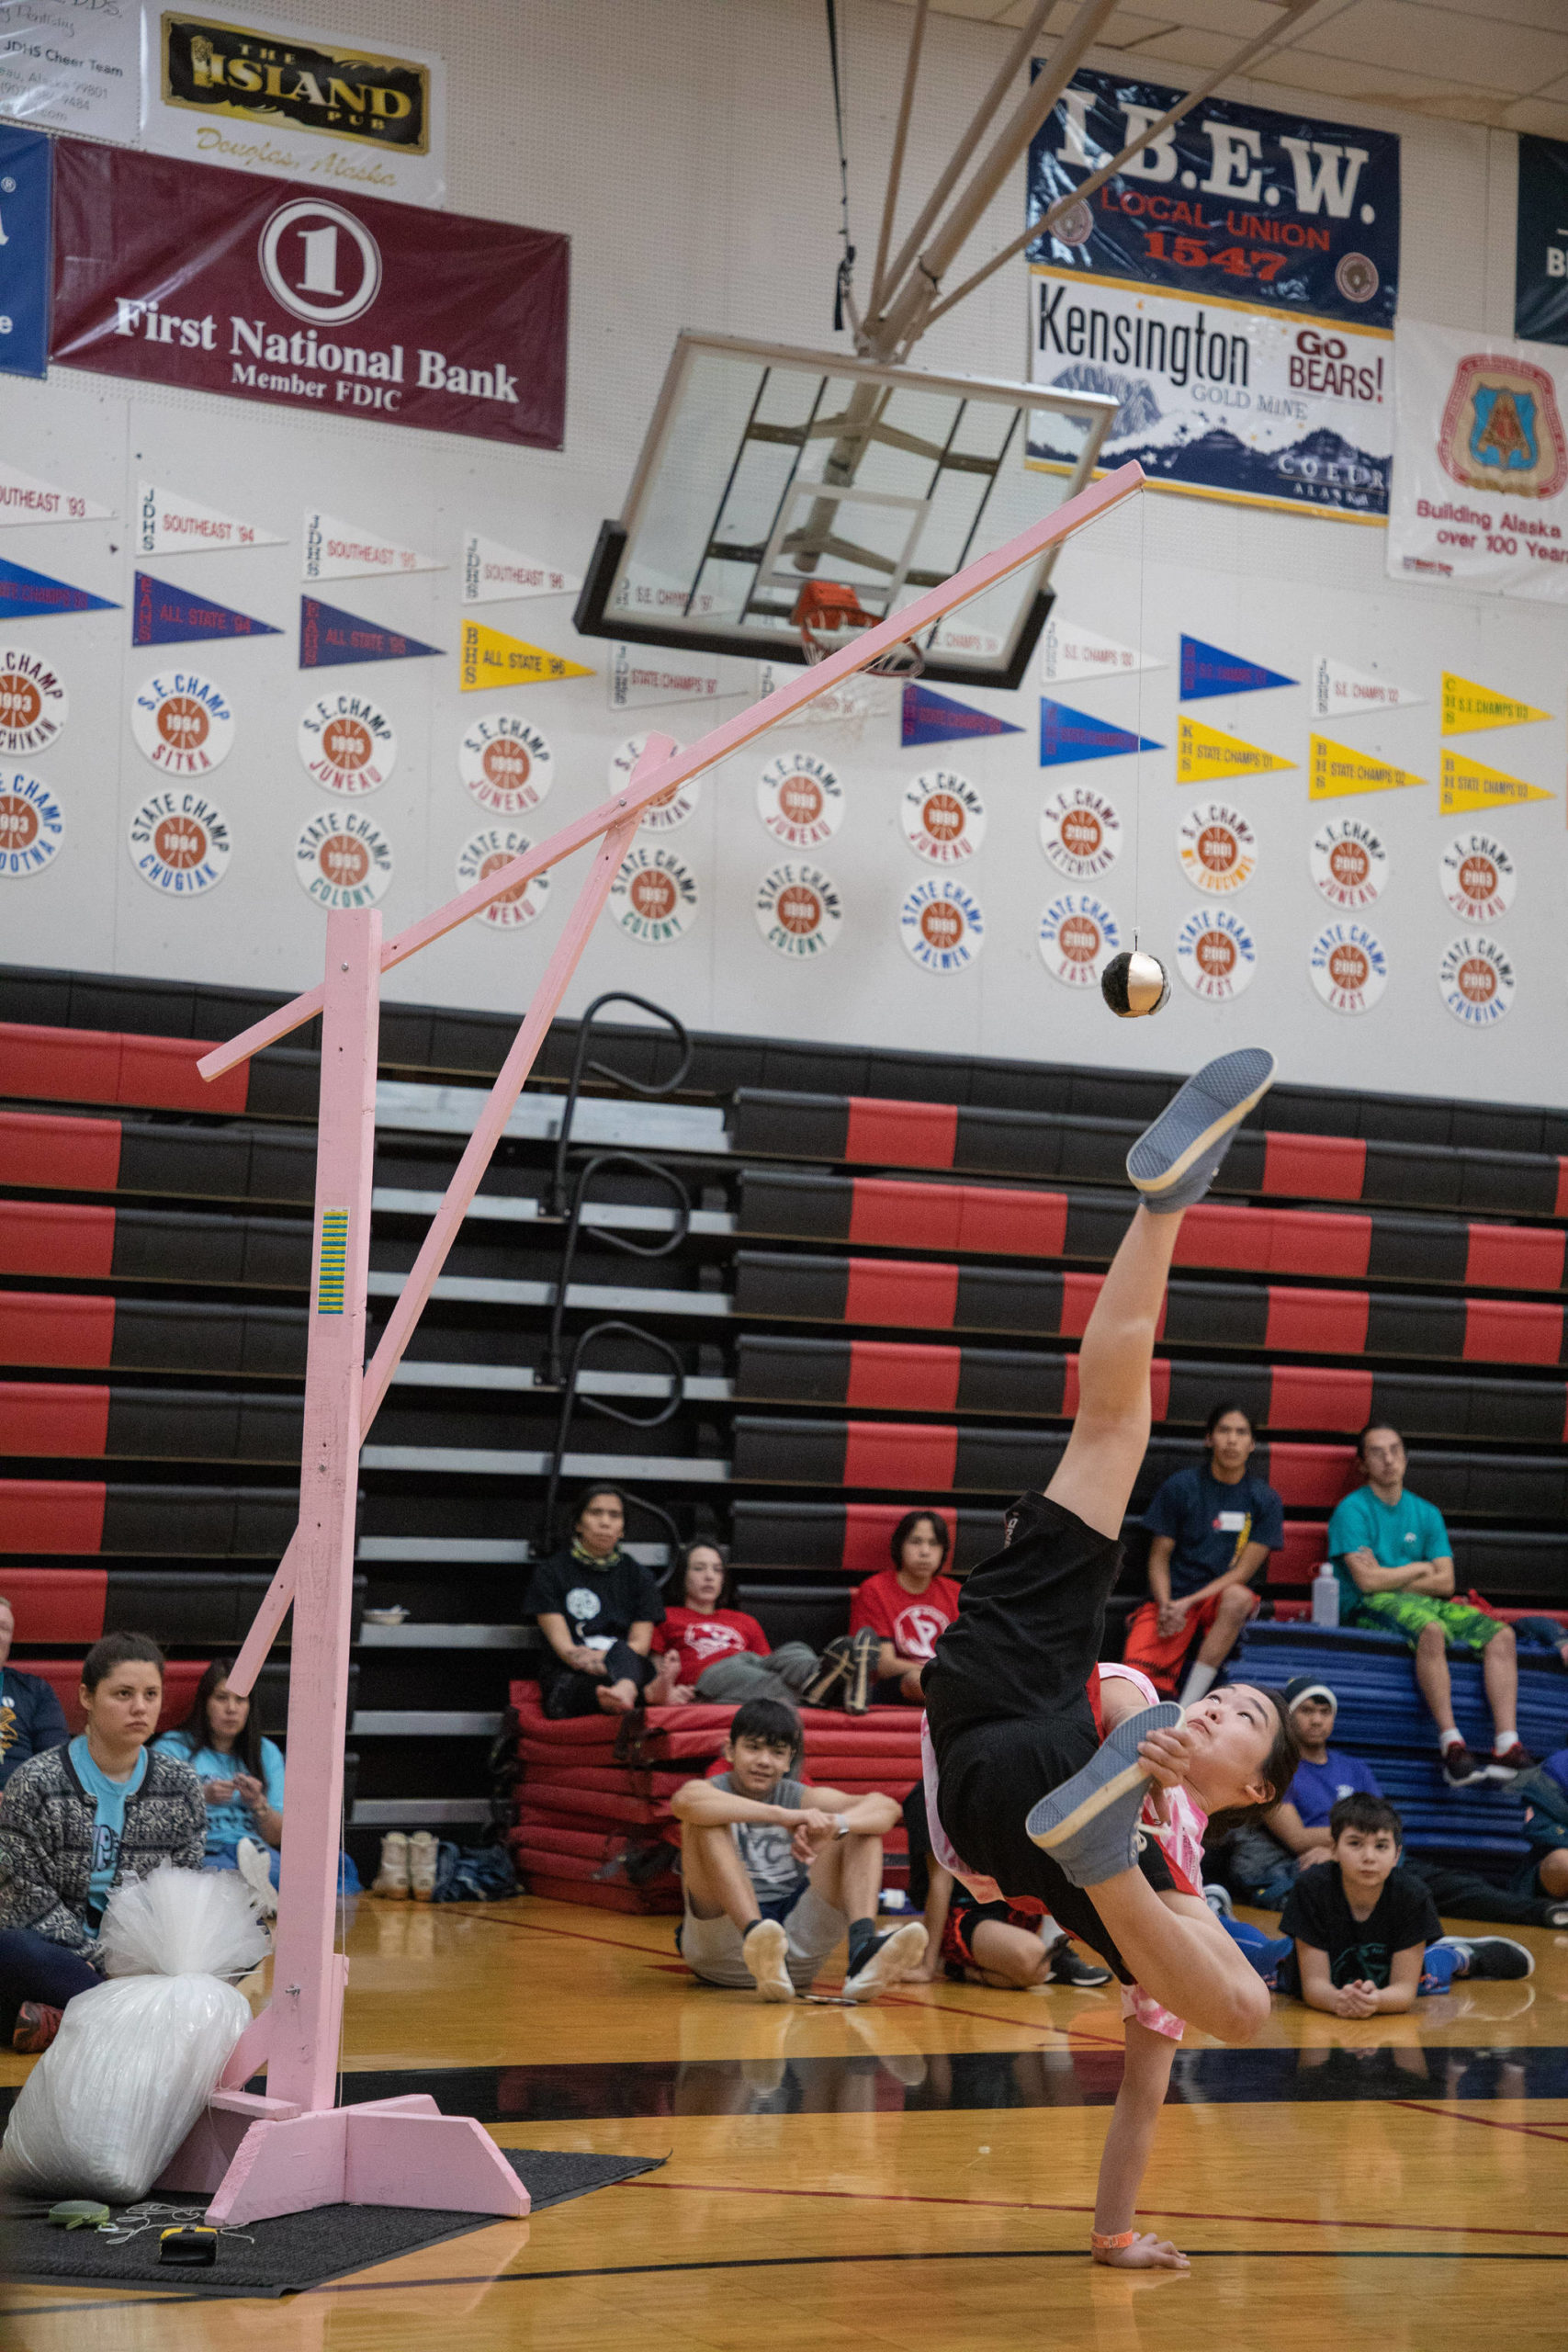 An athlete competes in the Alaskan high kick at the 2020 Traditional Games held Saturday and Sunday at Juneau-Douglas High School: Yadaa.at Kalé. The games attracted teams from throughout Alaska, international competitors and collegiate teams from Alaska Pacific University and Northern Arizona University. (Courtesy Photo | Lyndsey Brollini, courtesy of Sealaska Heritage Institute)